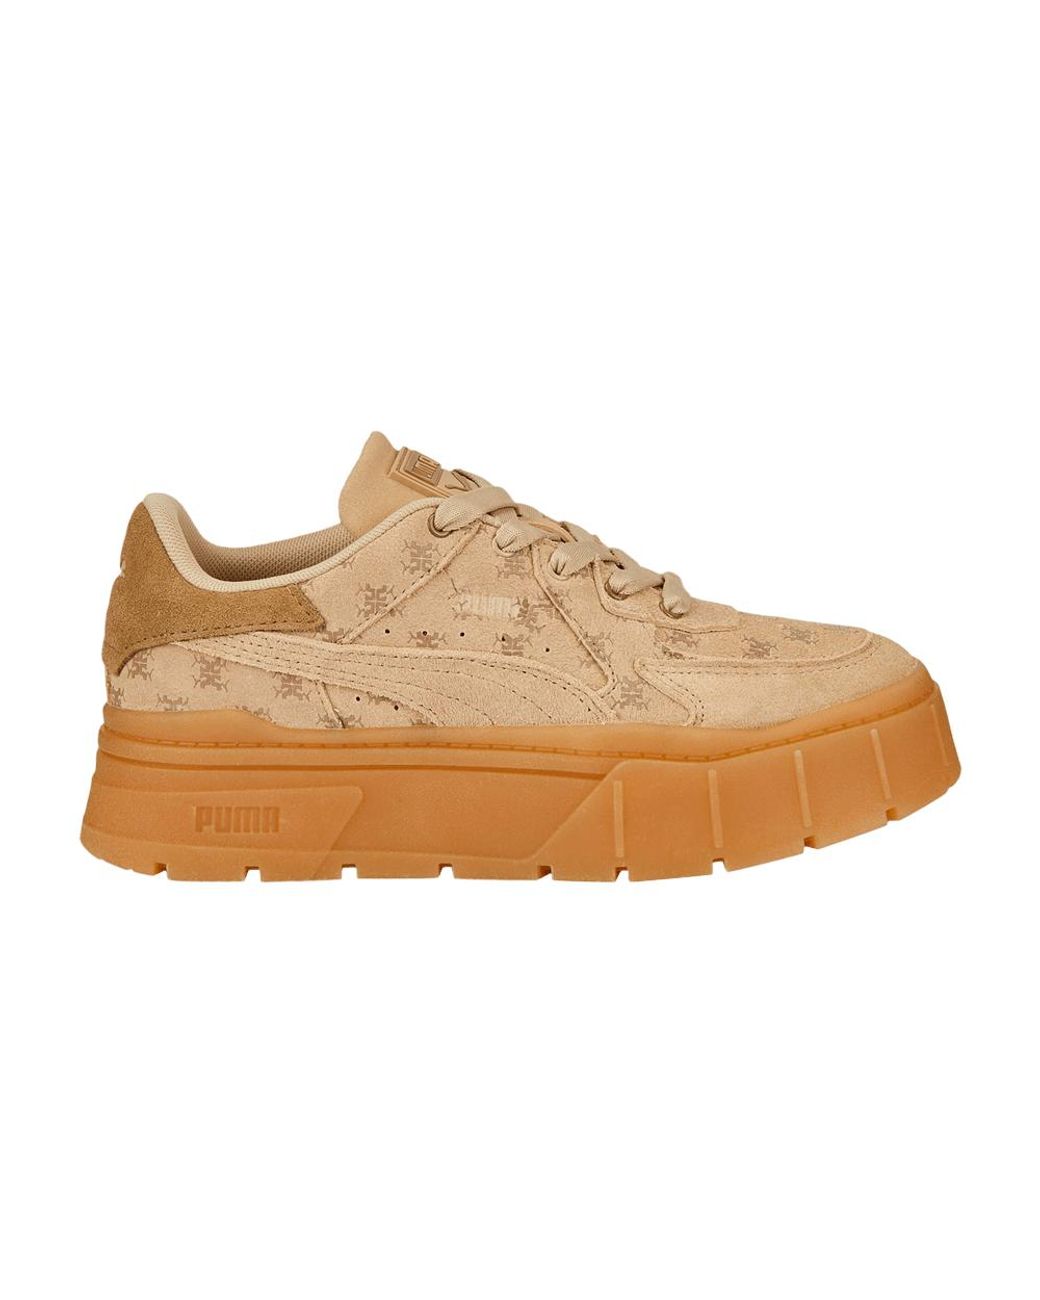 PUMA Mayze Stack Edgy T7 'light Sand' in Natural | Lyst